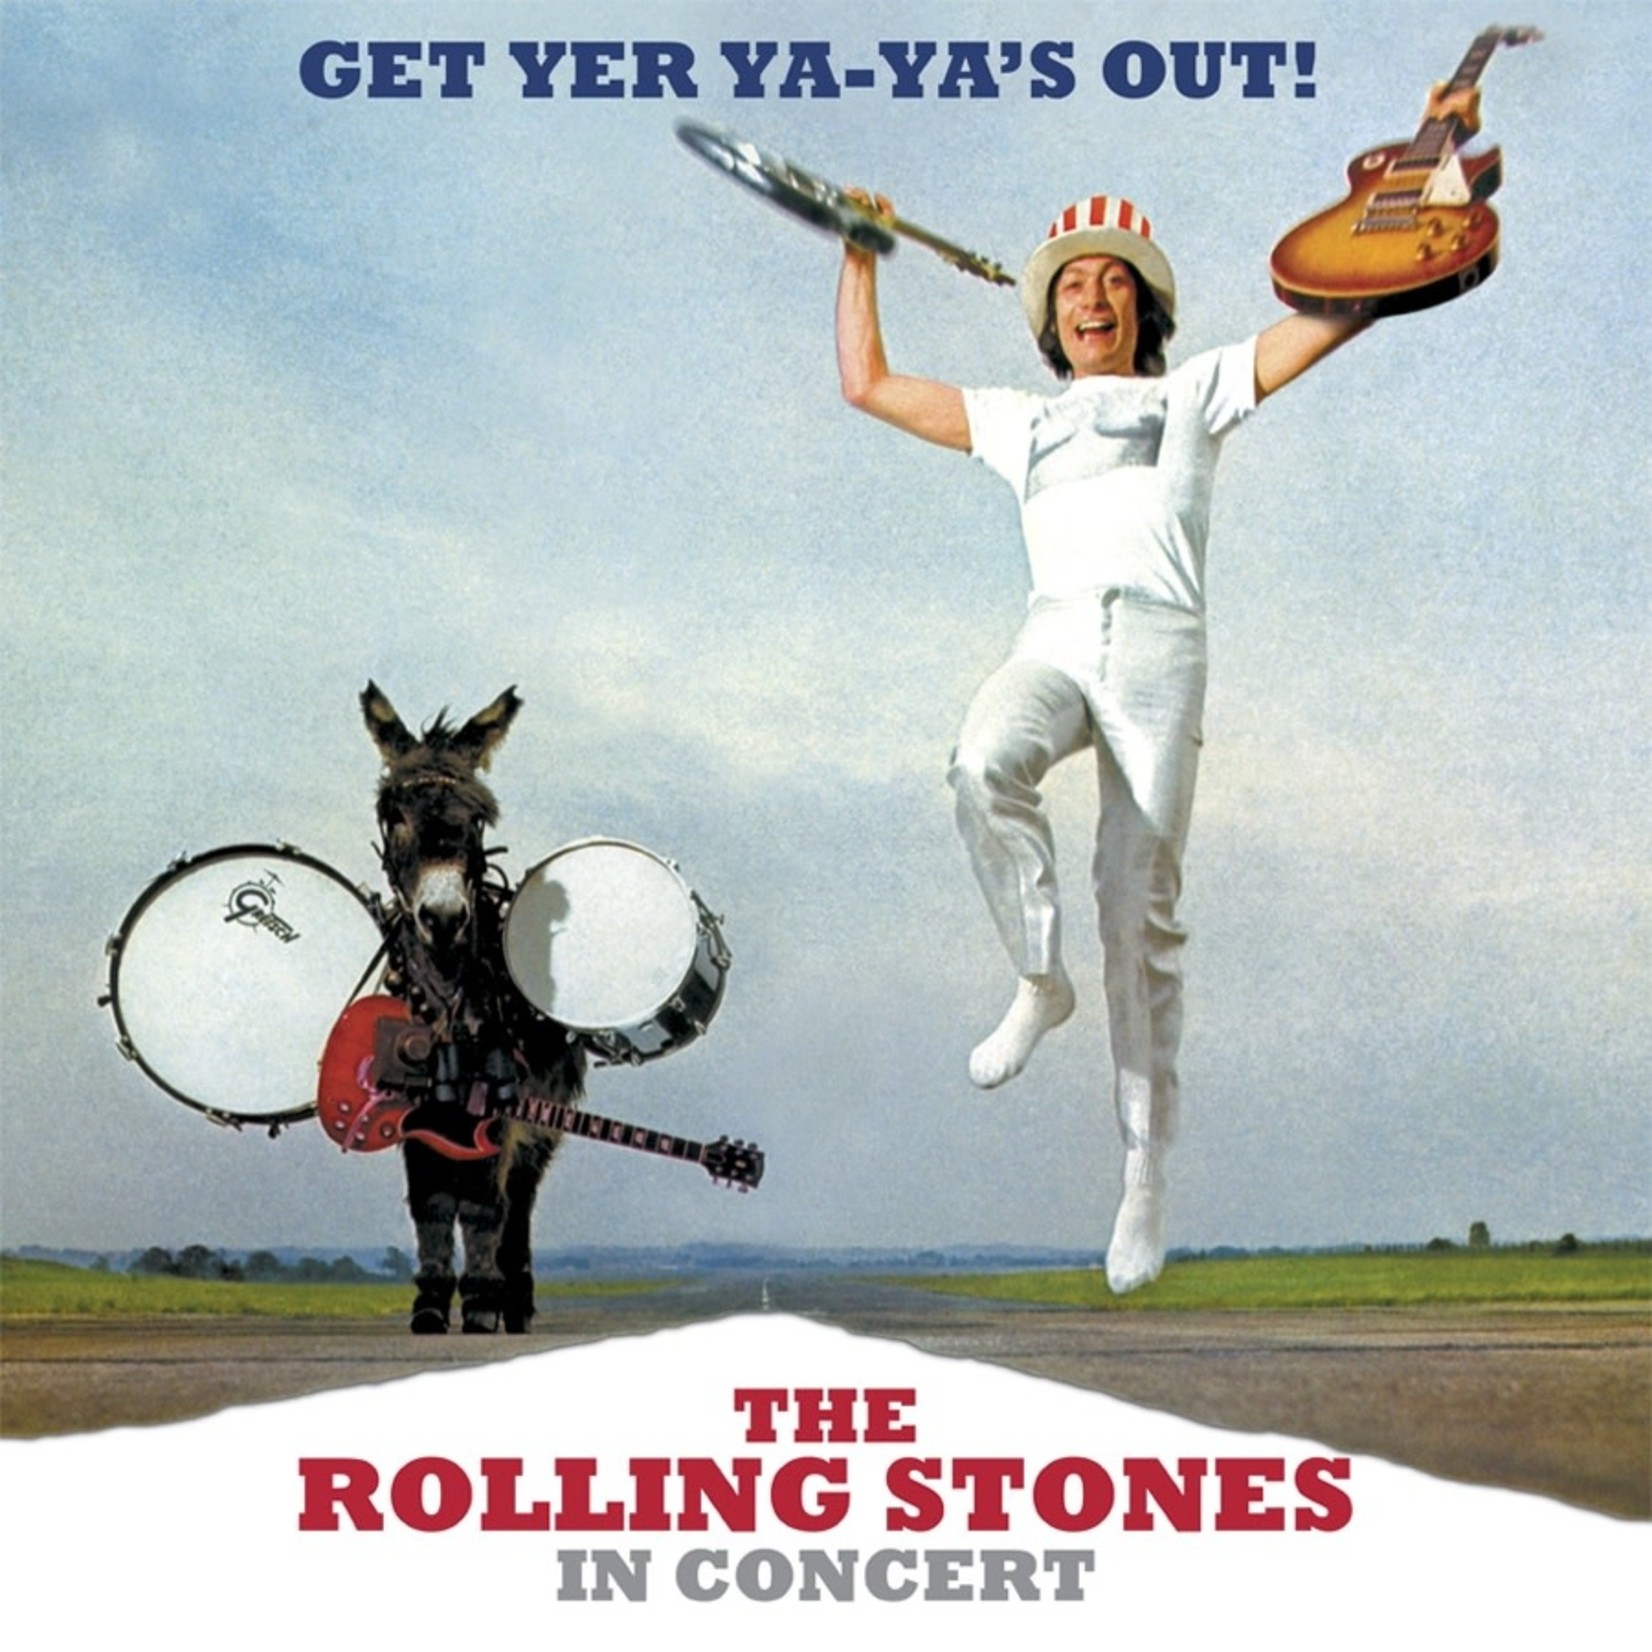 [Vintage] Rolling Stones - Get Yer Ya-Yas Out